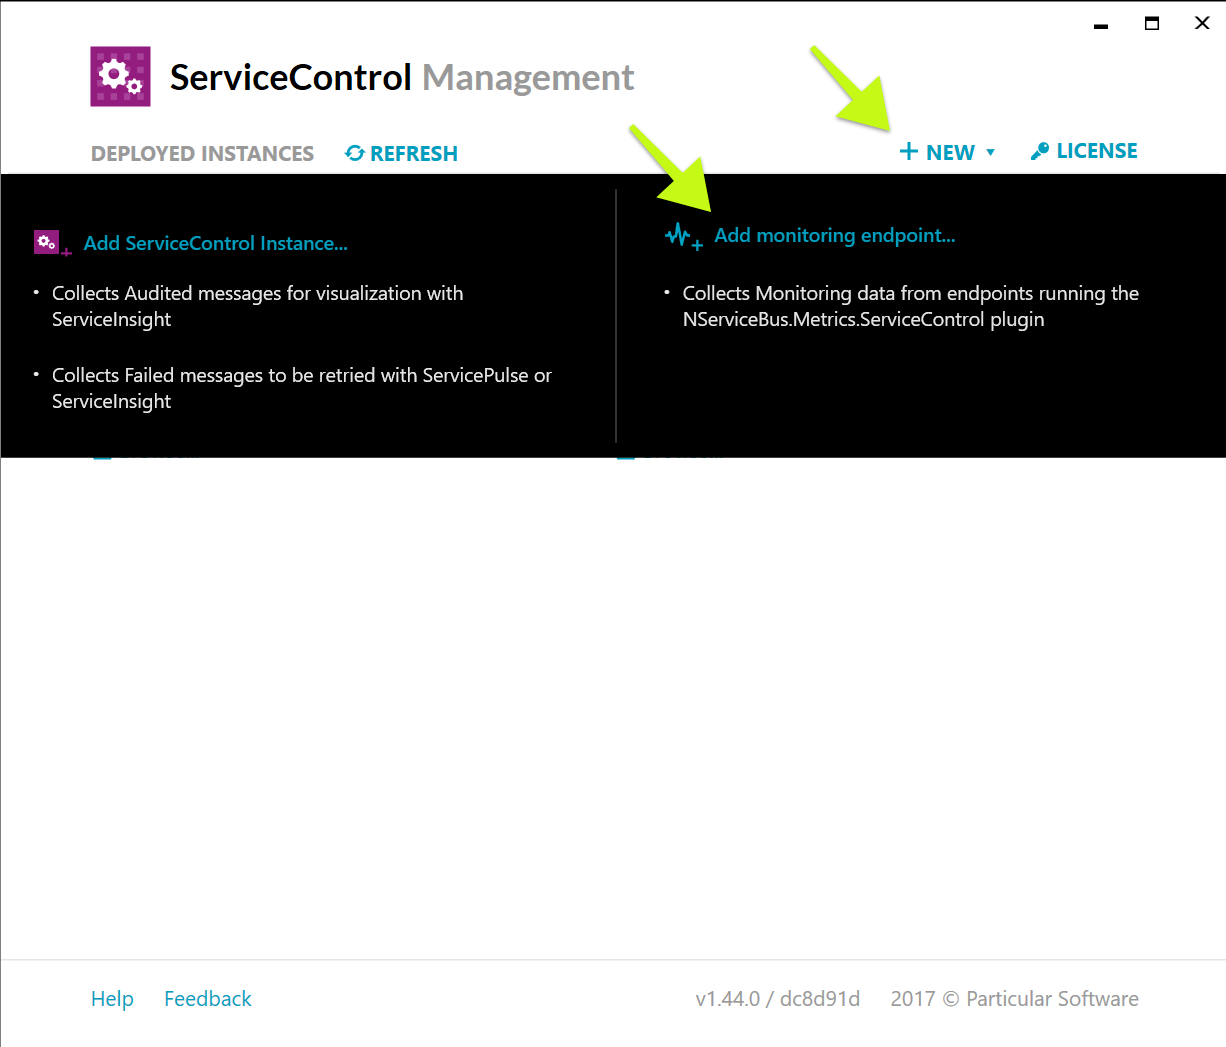 ServiceControl Management Utility - Add new Monitoring instance